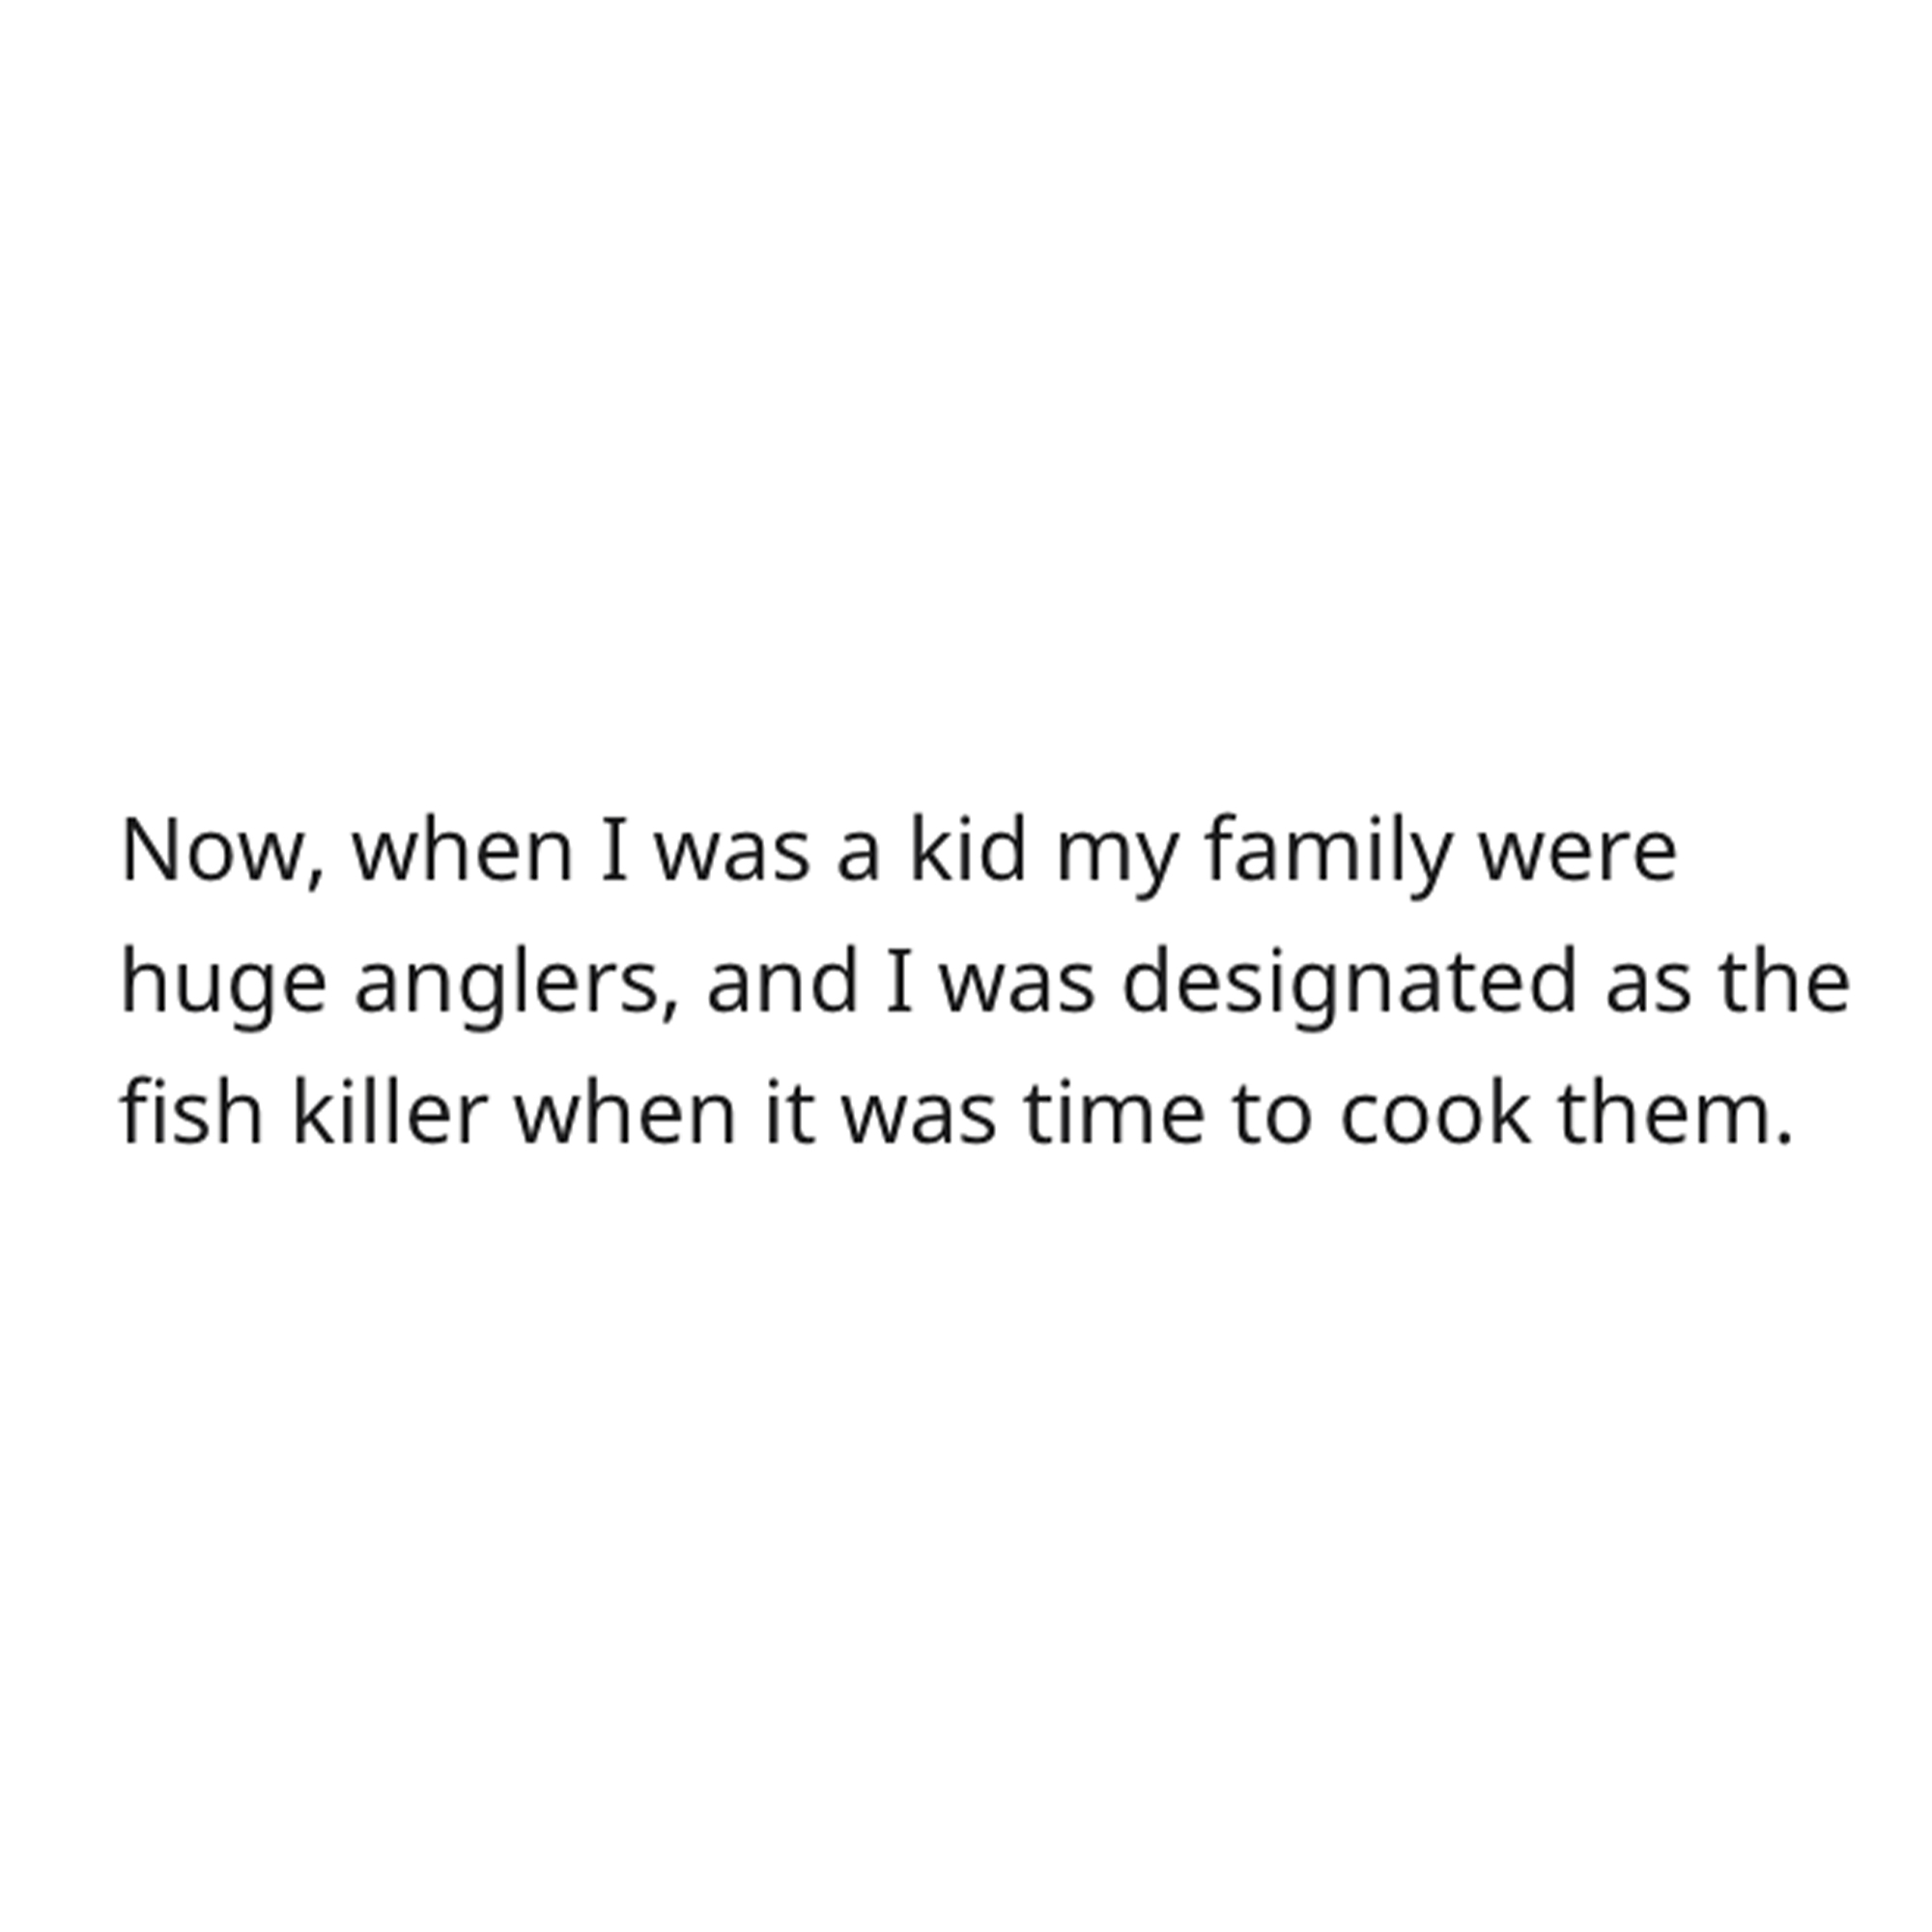 goldfish story - angle - Now, when I was a kid my family were huge anglers, and I was designated as the fish killer when it was time to cook them.